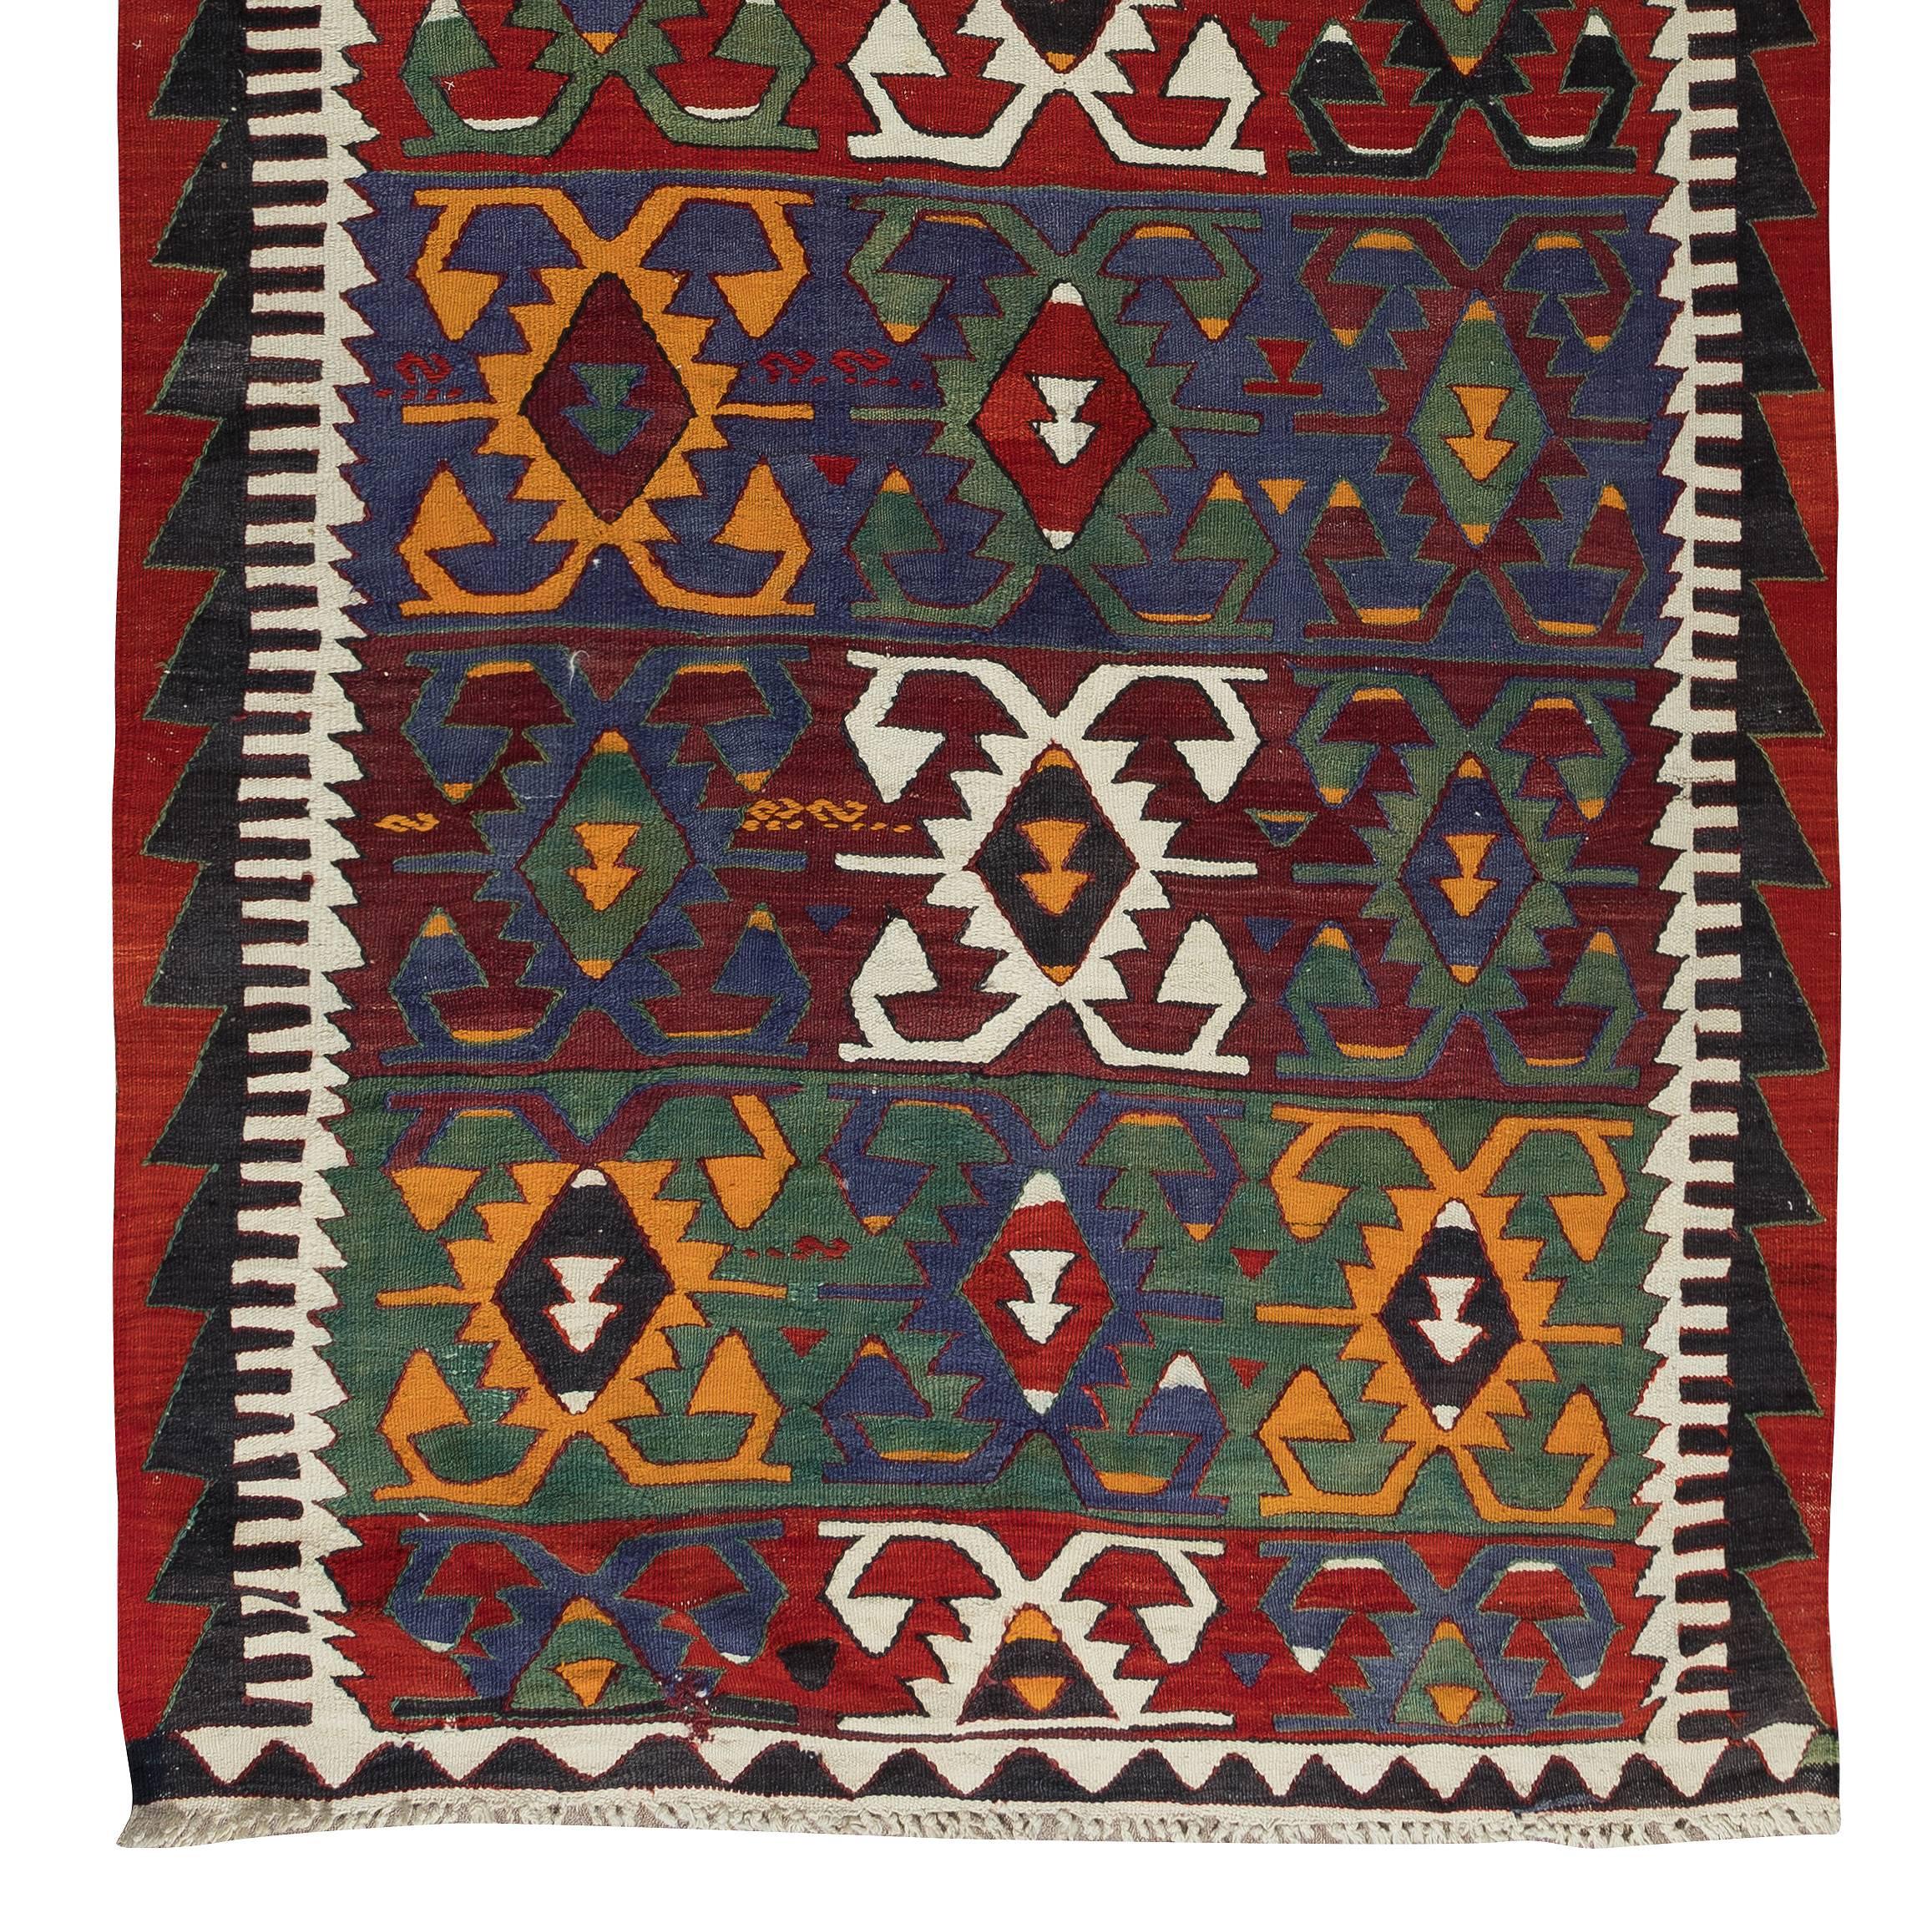 5.4x10.8 Ft Multicolor Hand-Woven Turkish Vintage Wool Kilim, Flat-Weave Rug In Good Condition For Sale In Philadelphia, PA